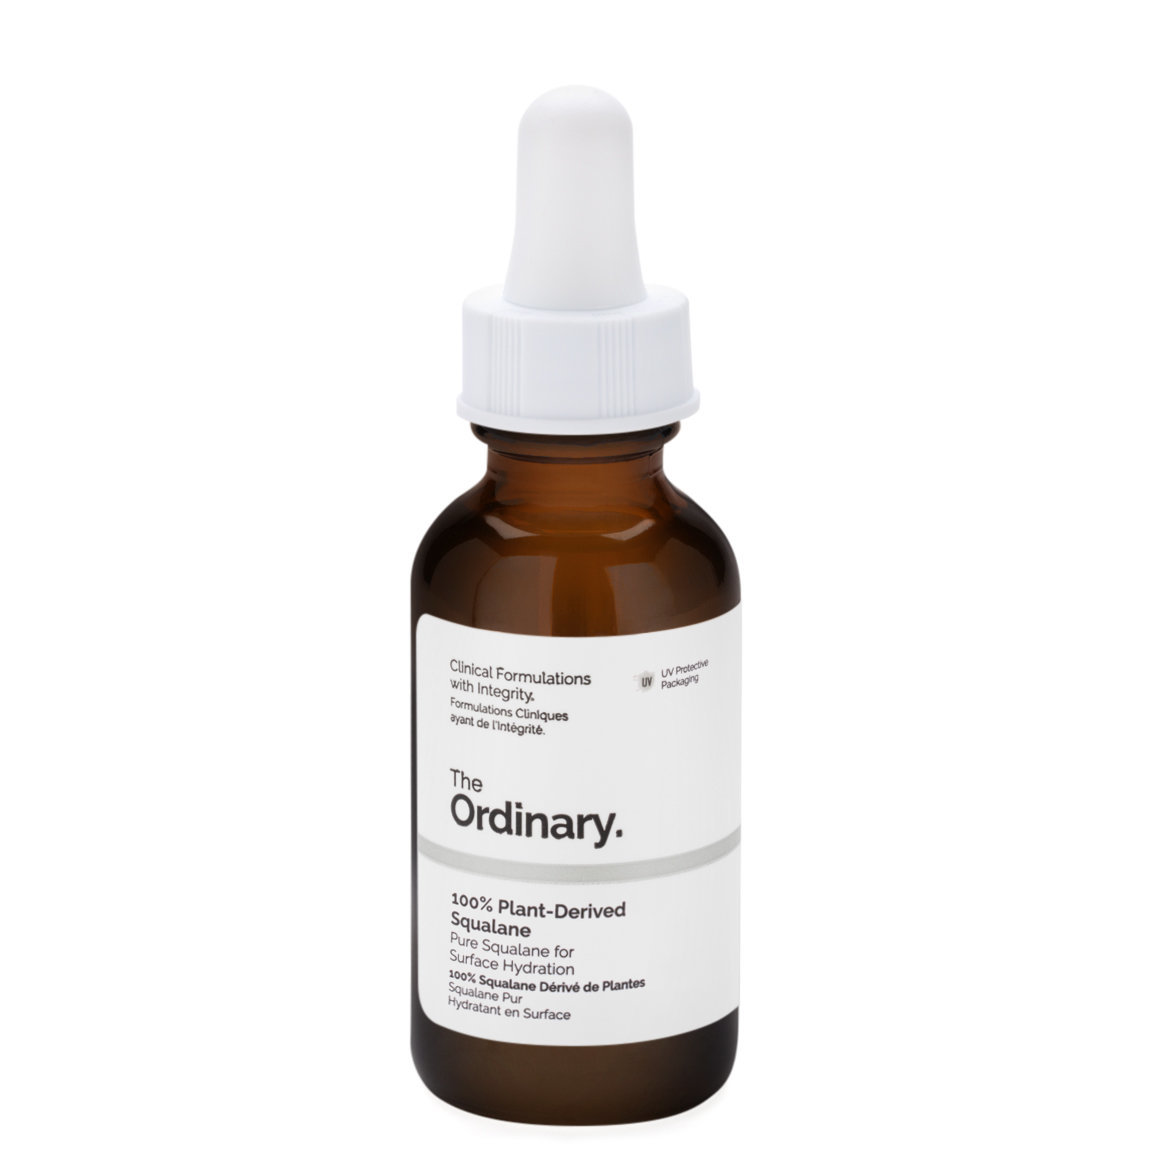 The Ordinary. 100% Plant-Derived Squalane alternative view 1 - product swatch.